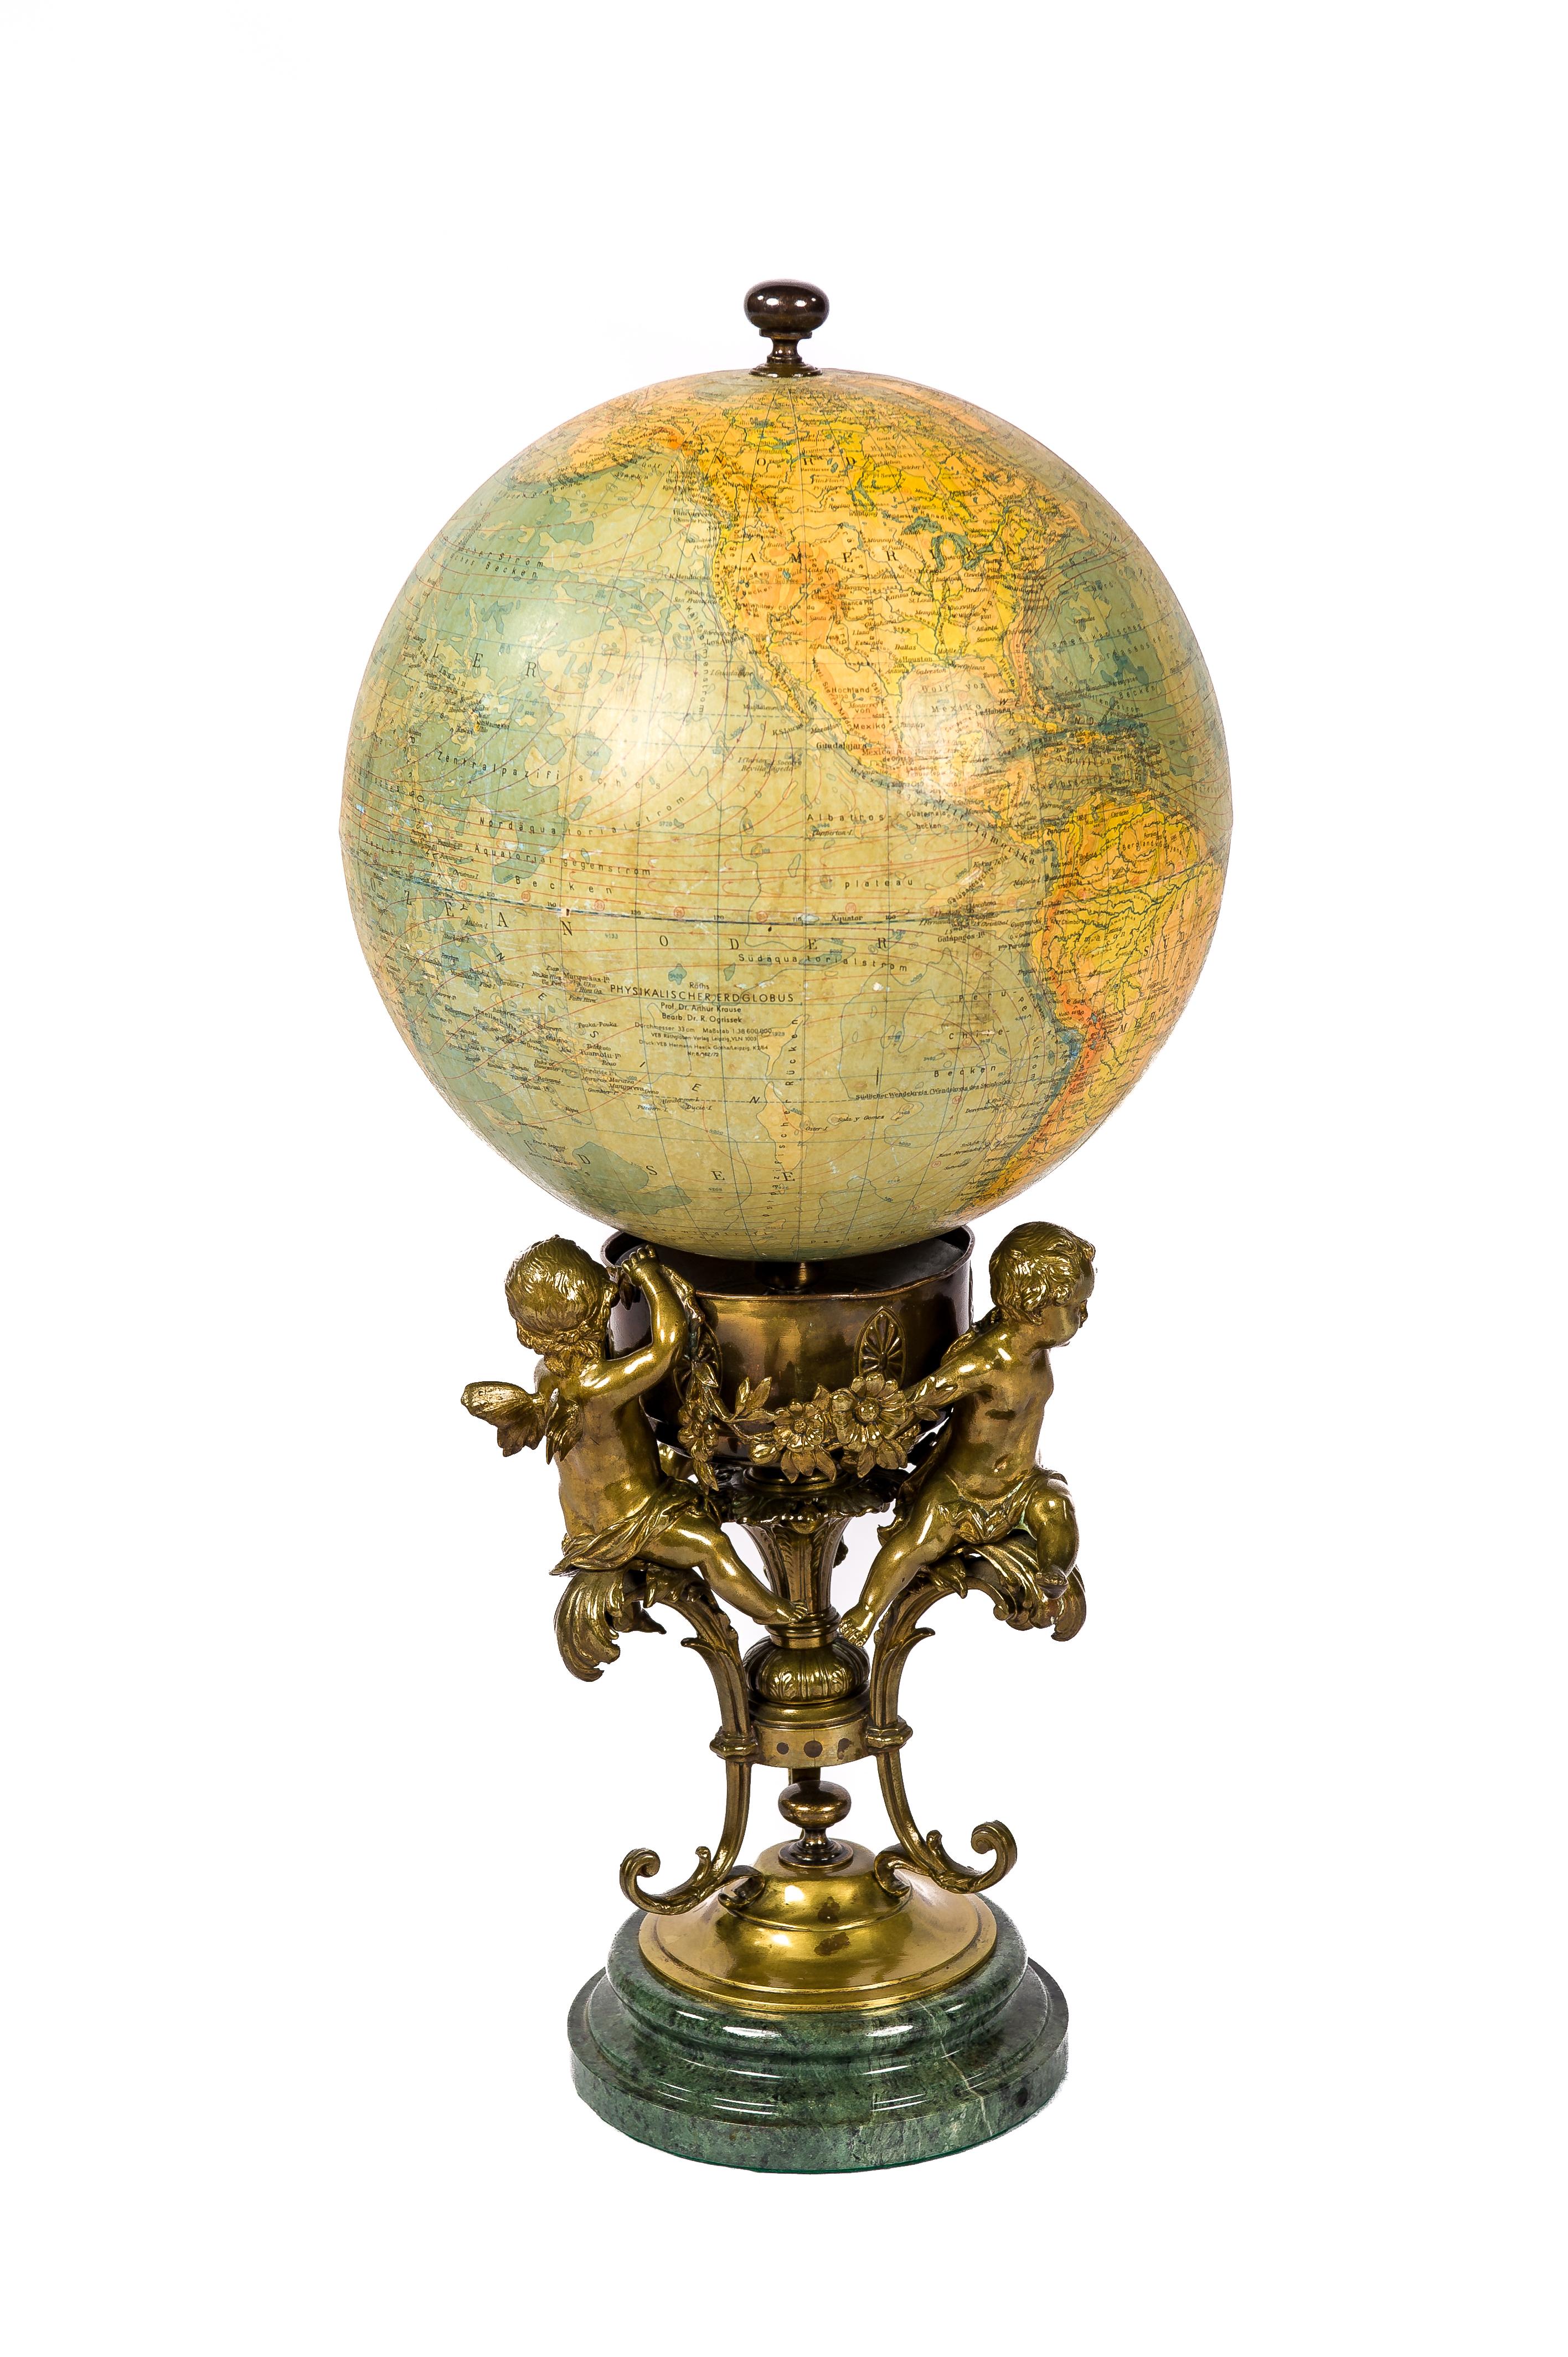 Antique terrestrial globe by Prof. Dr. Arthur Krause made by the German institute Ráths. The globe has a scale size of 1 : 38.600.900. The globe rests on a brass bowl decorated with three patinated cast brass cherubs or angels holding a floral